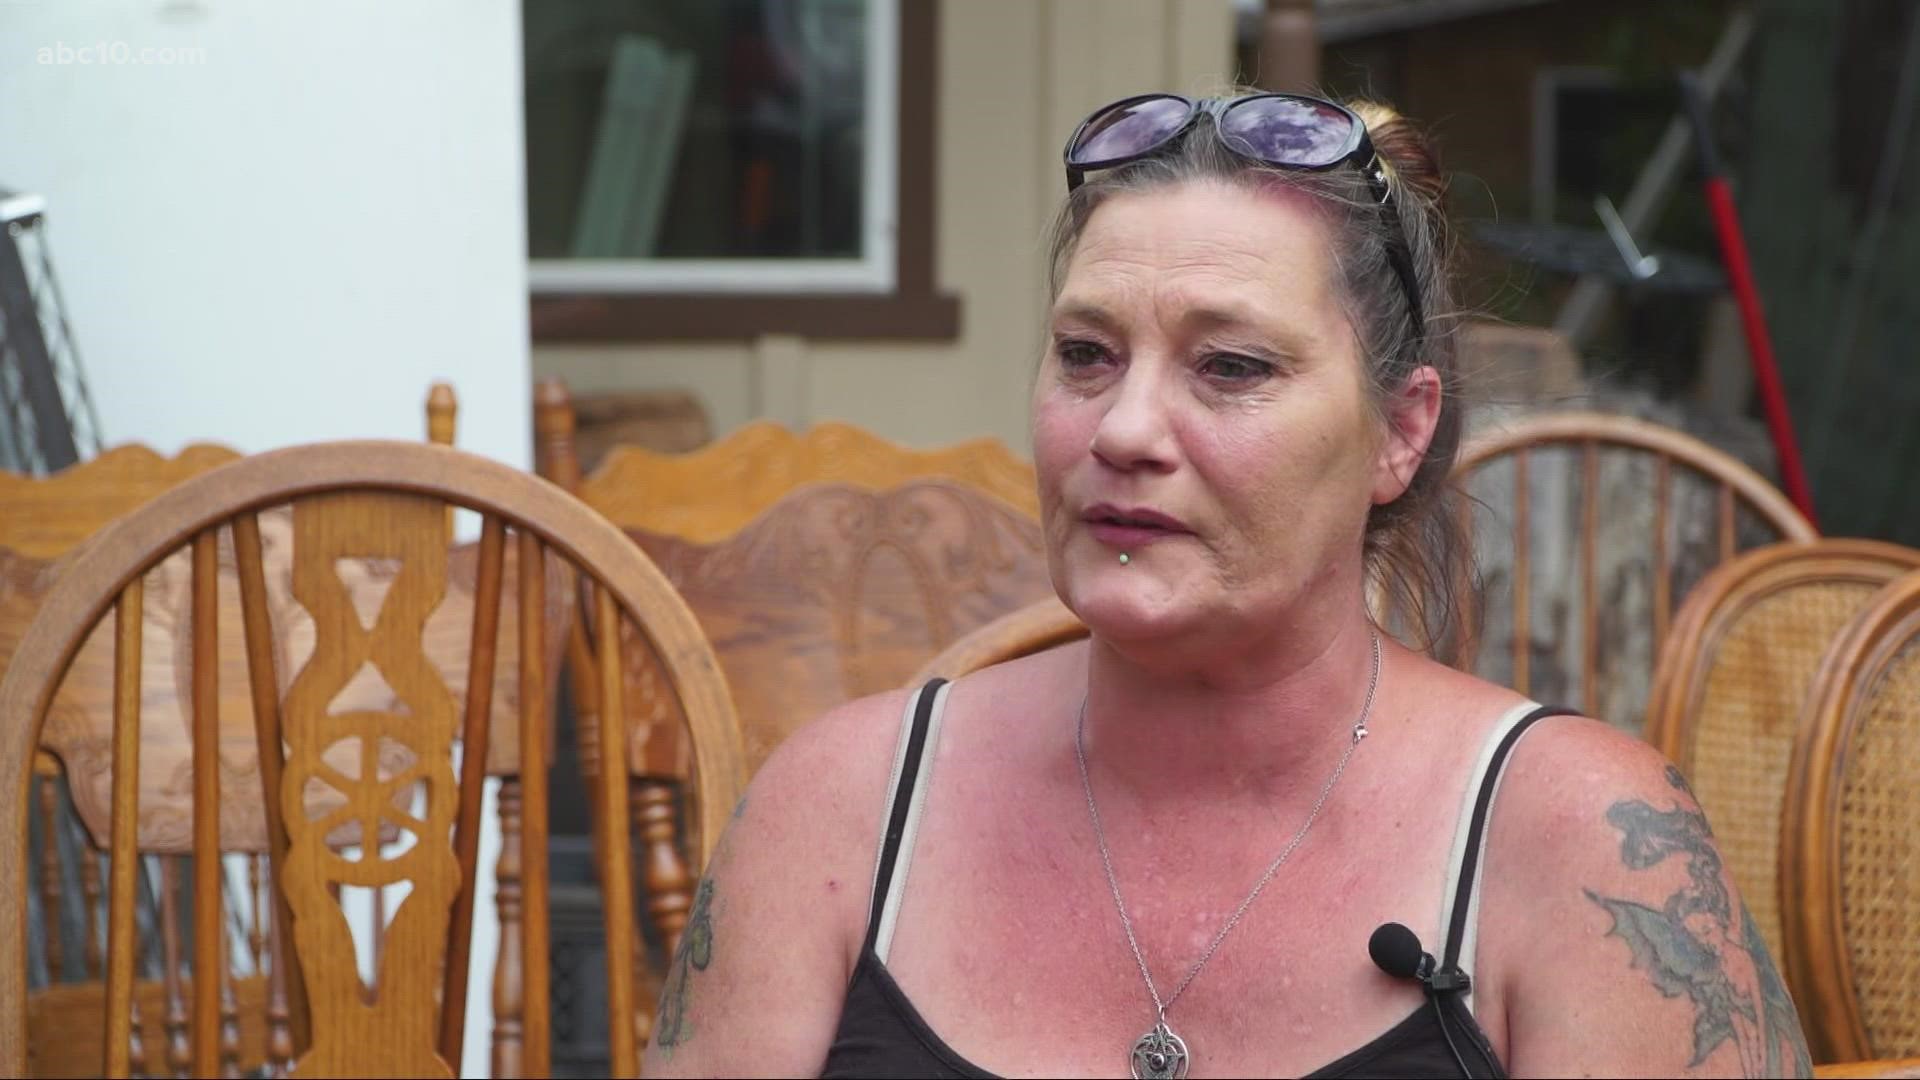 Grizzly Flats woman mourns loss of home Caldor Fire abc10